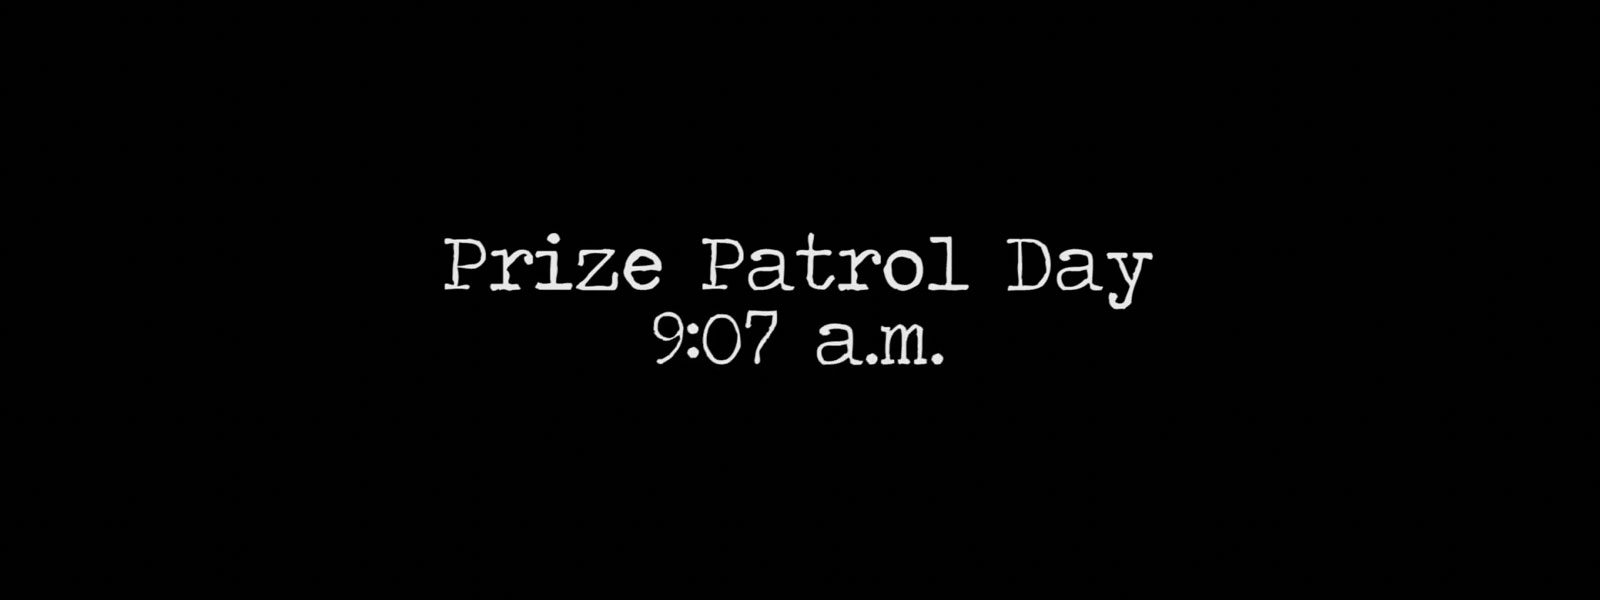 image that reads "Prize Patrol Day 9:07 a.m."